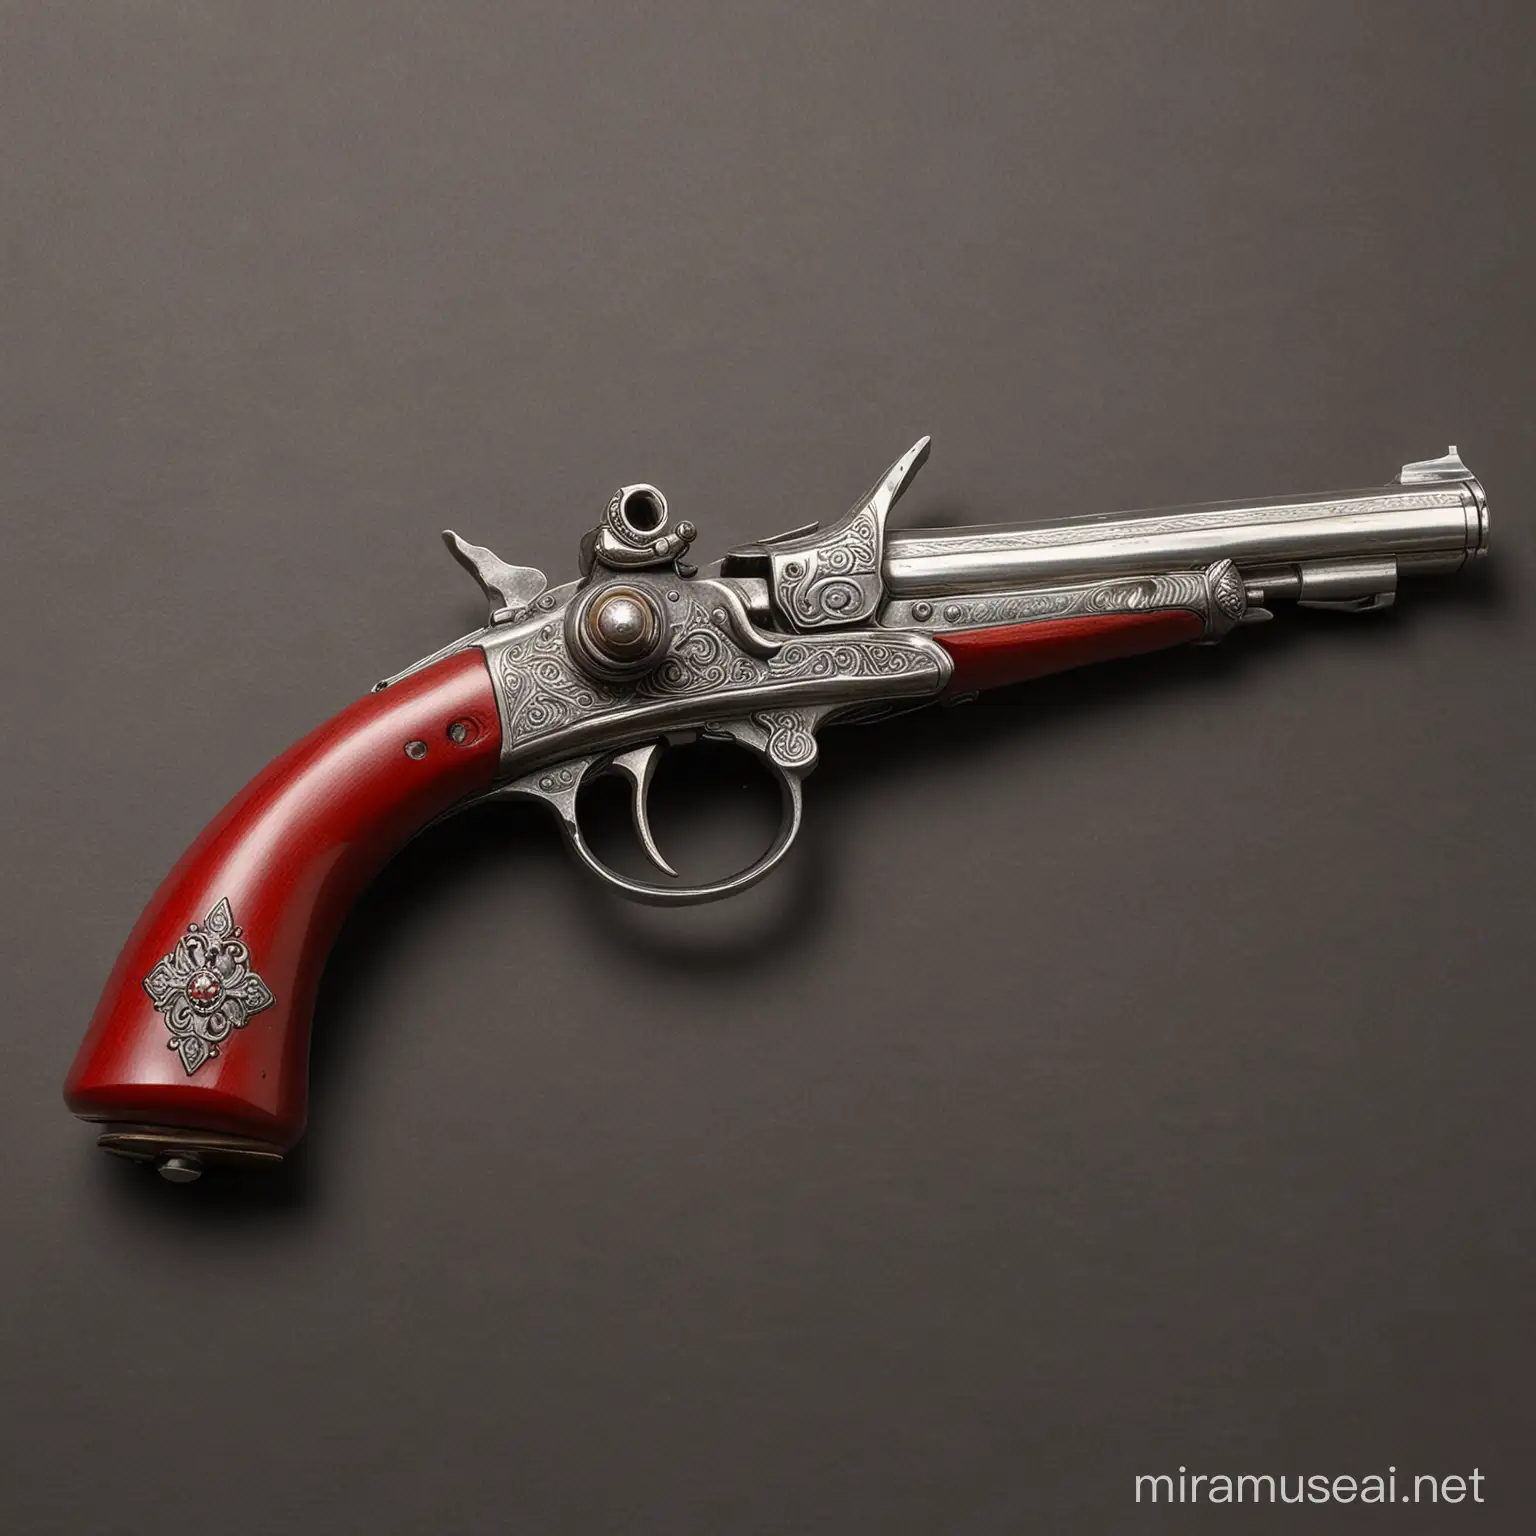 Medieval Pistol with Silver Finish and Red Wooden Stock